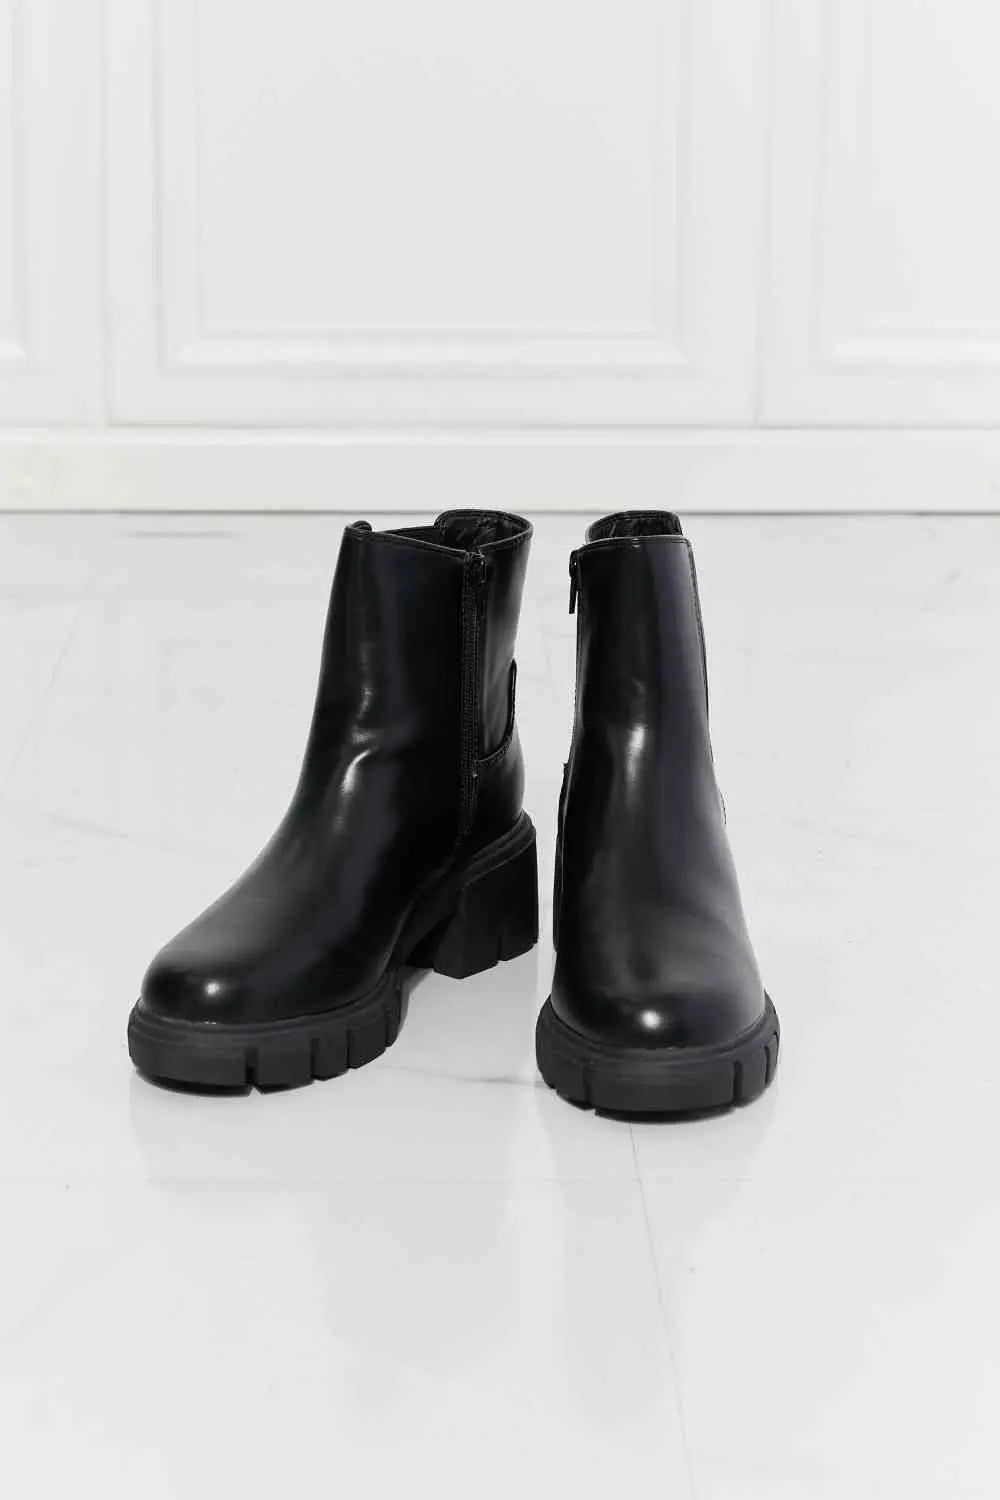 MMShoes What It Takes Lug Sole Chelsea Boots in Black - Image #4